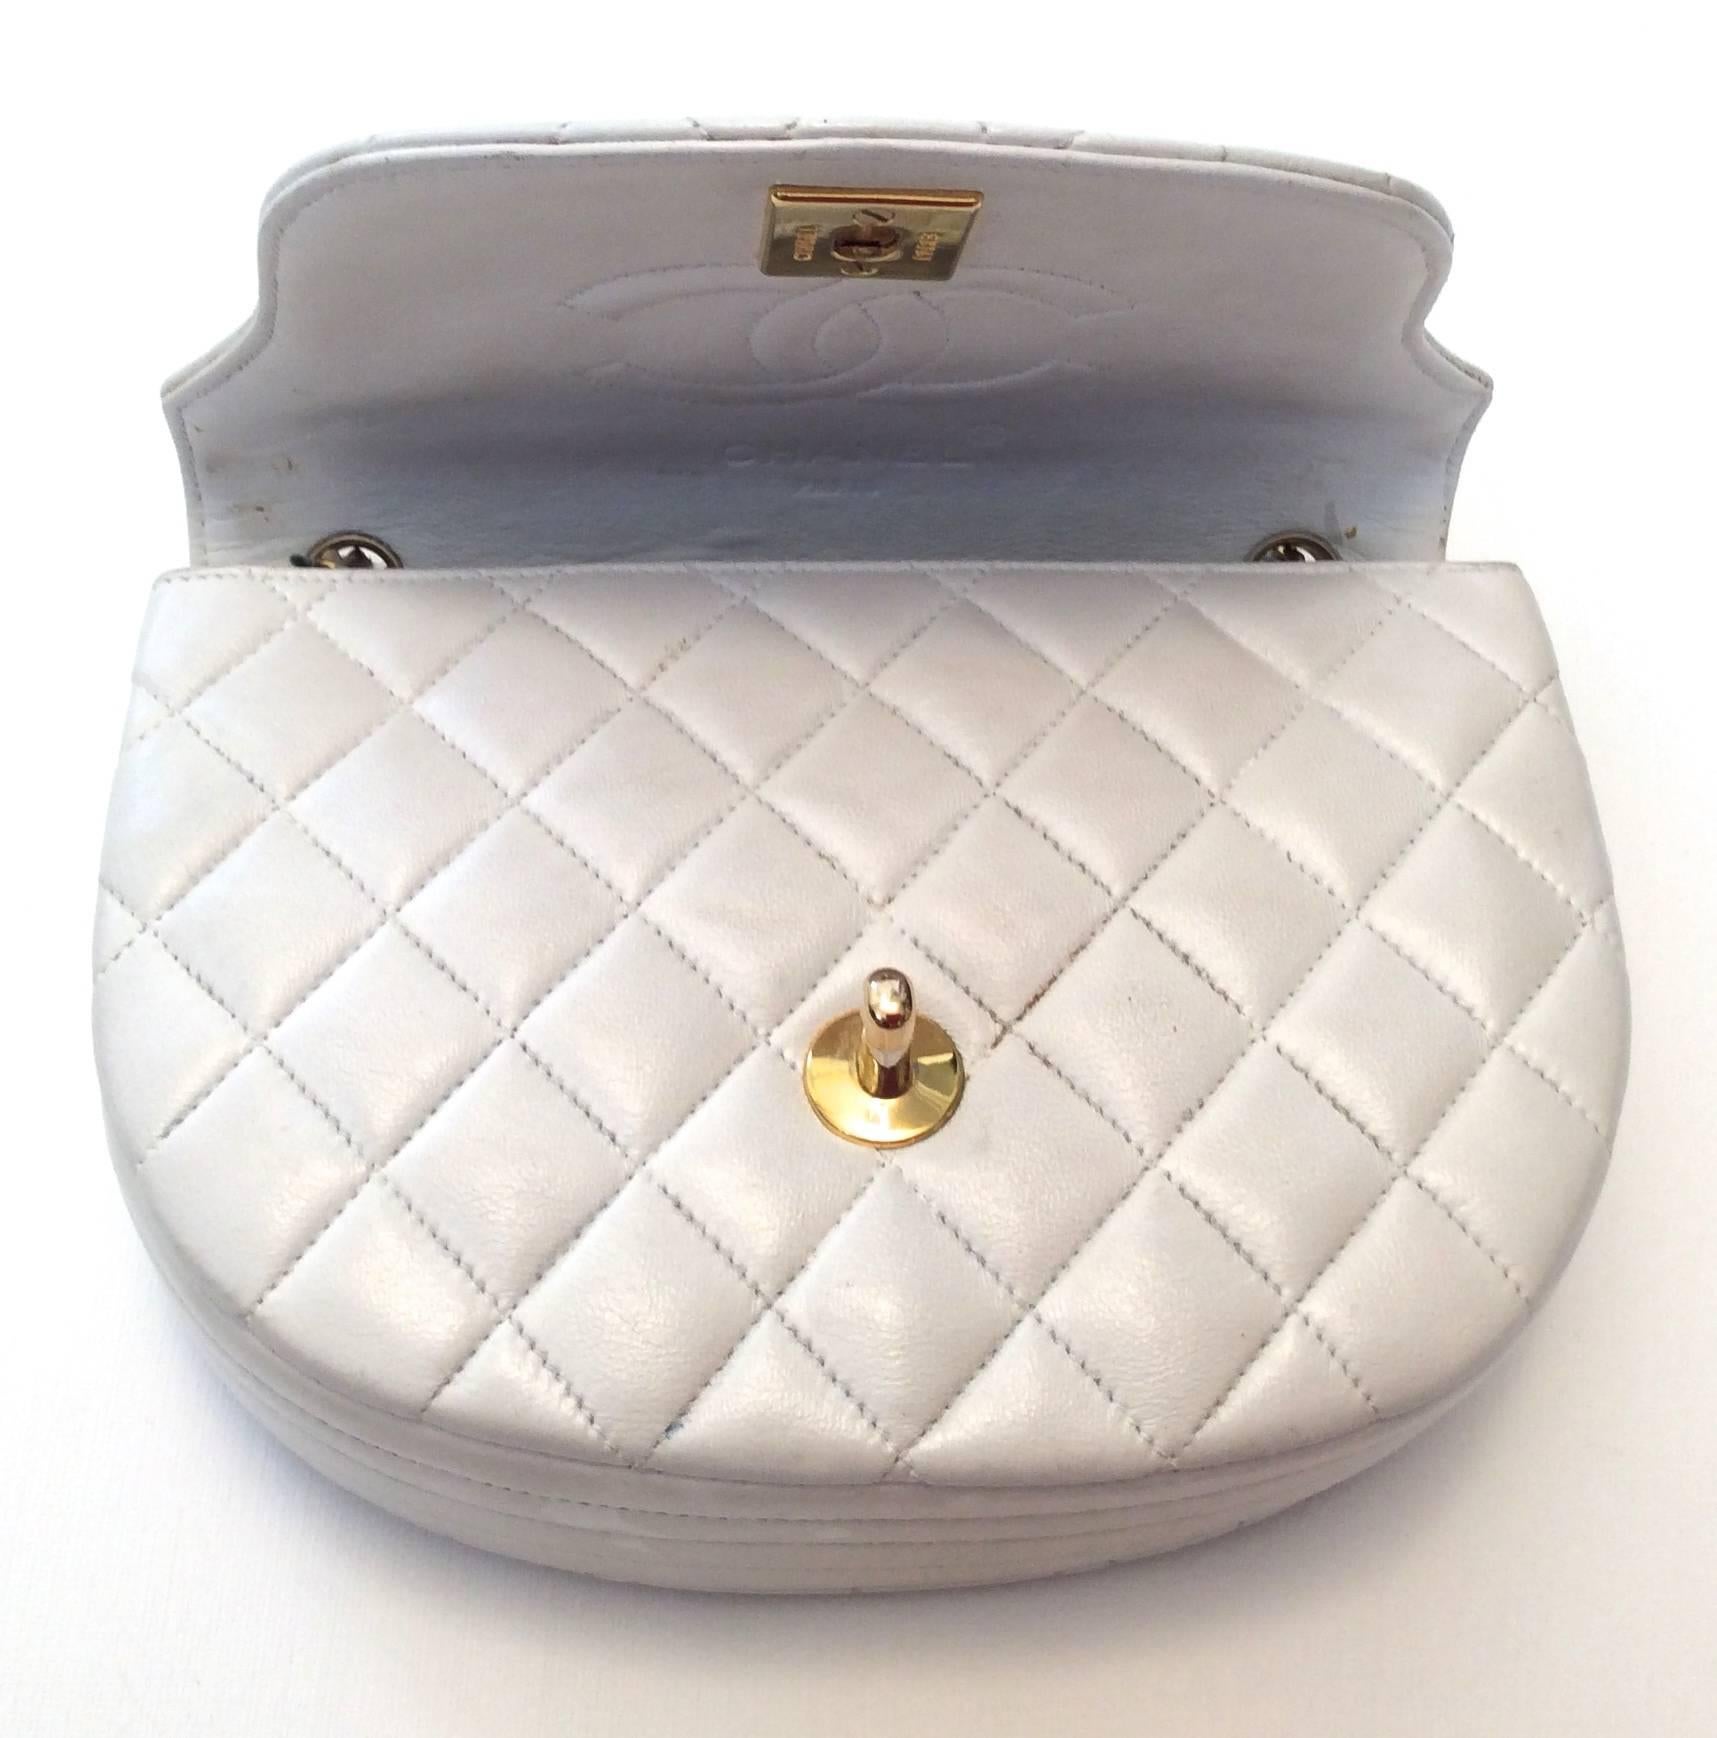 Presented here is a beautiful Chanel mini classic purse. The purse is white leather with gold hardware. The bag has the iconic CC clasp on the front flap to close the bag. On the interior flap of the bag, the bag is signed with a stitched in CC logo